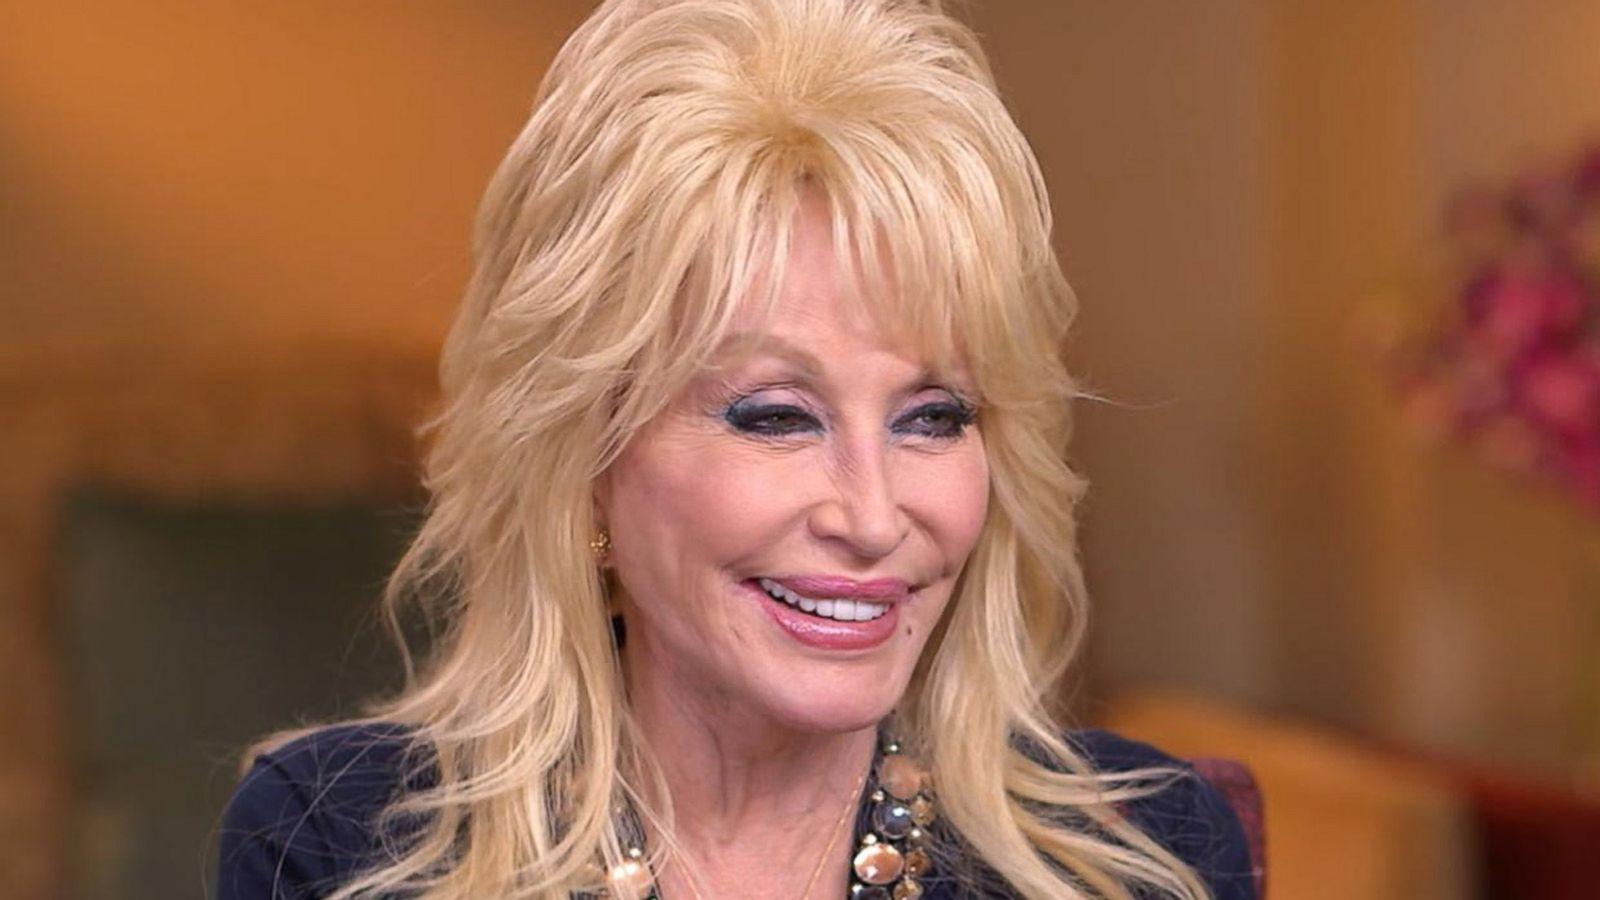 Dolly Parton says original '9 to 5' cast are all in